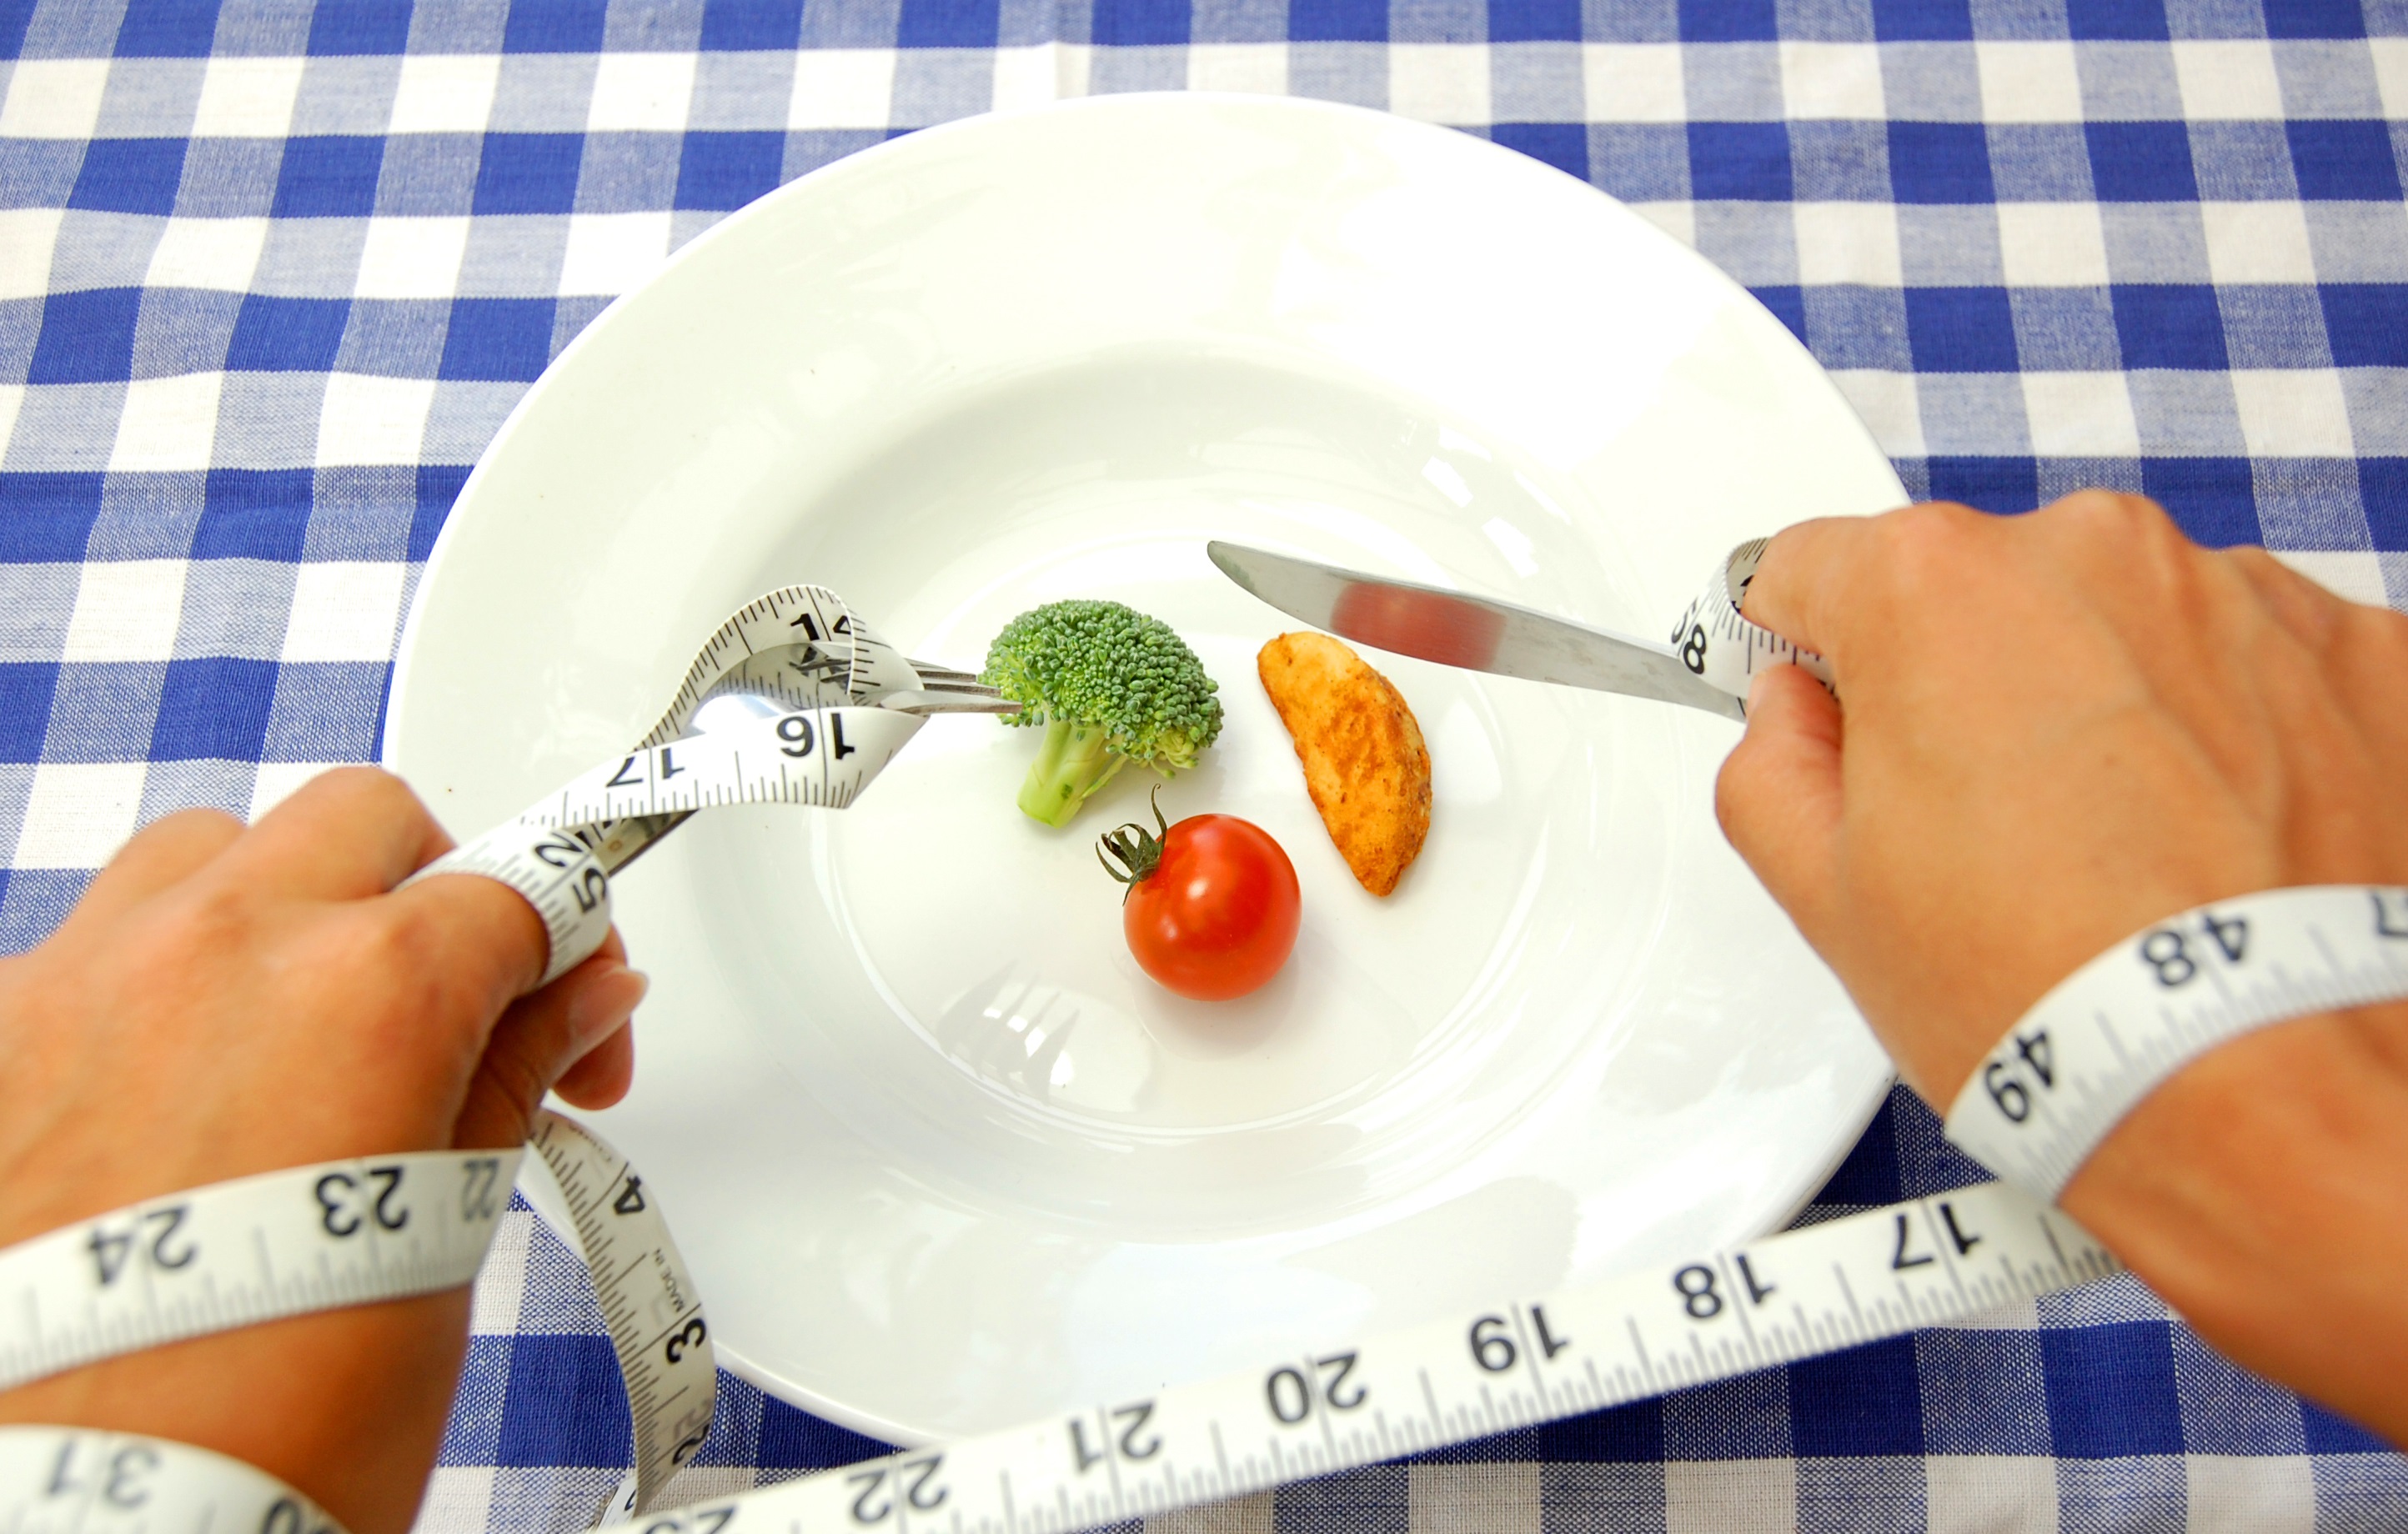 tape measure around person's arm, restricting movement. In the plate is a tiny amount of little broccoli and tomato